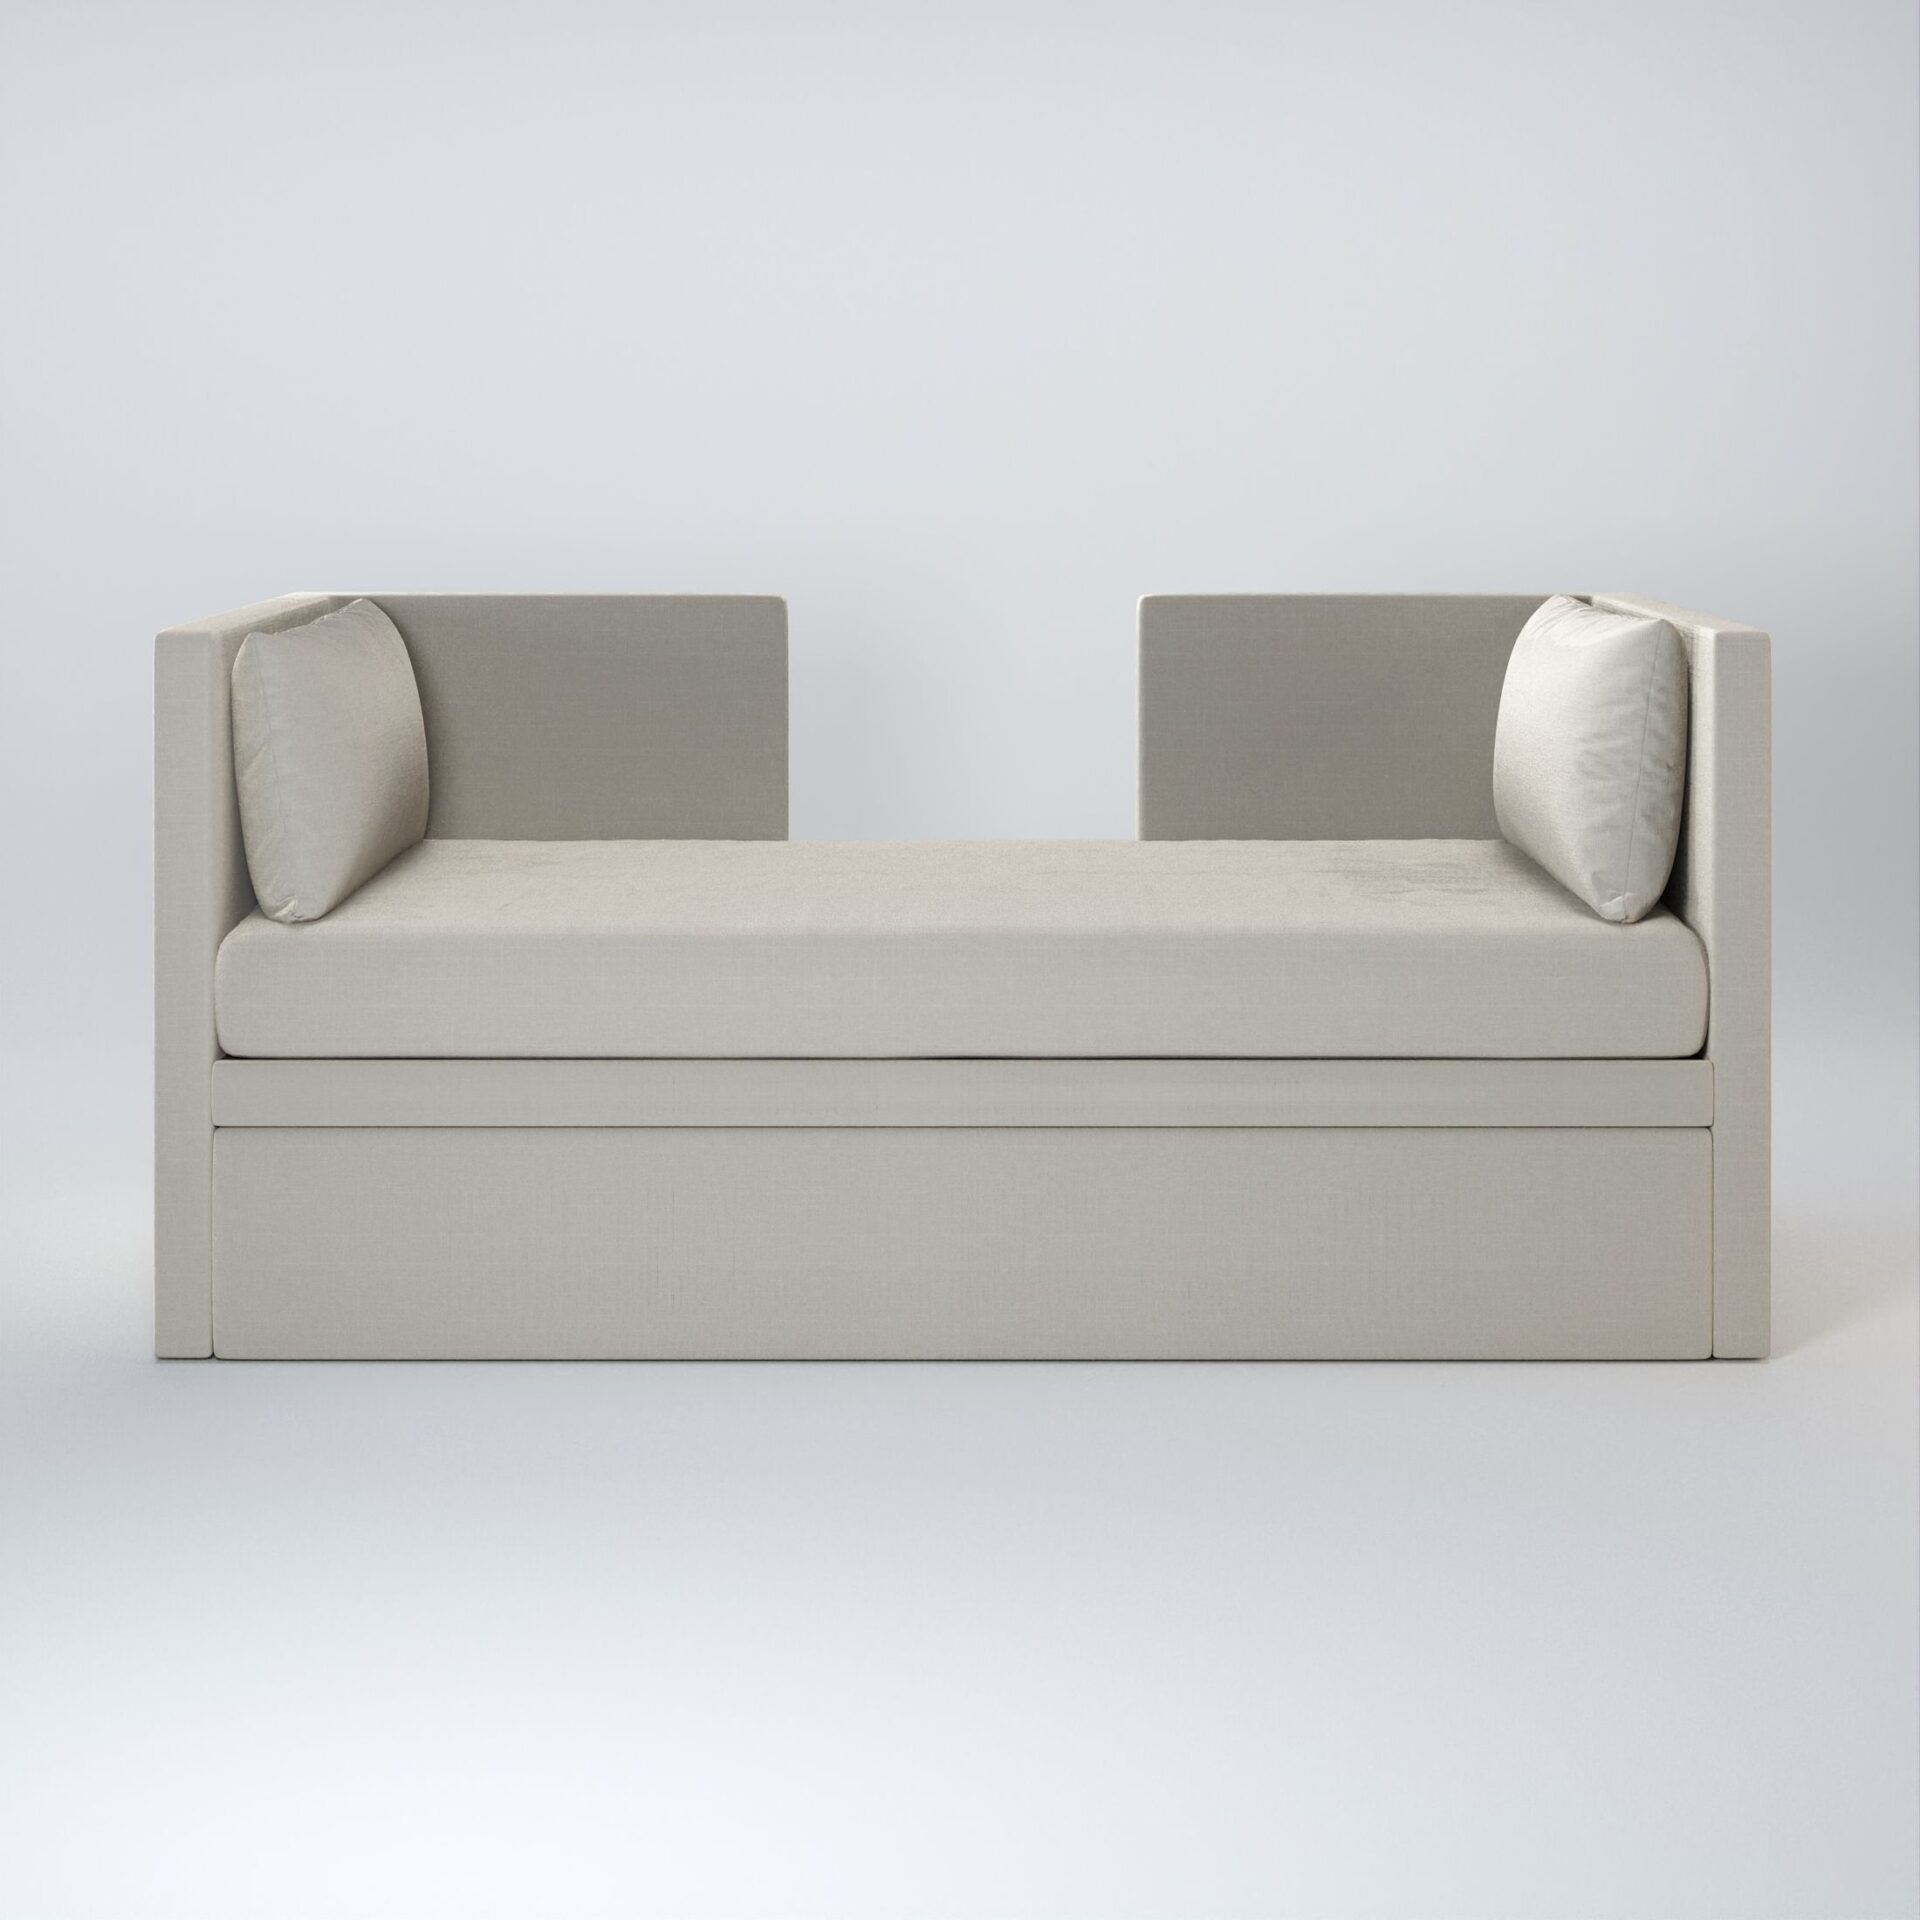 ARDAN-trundle-daybed-blend-home-furnishings